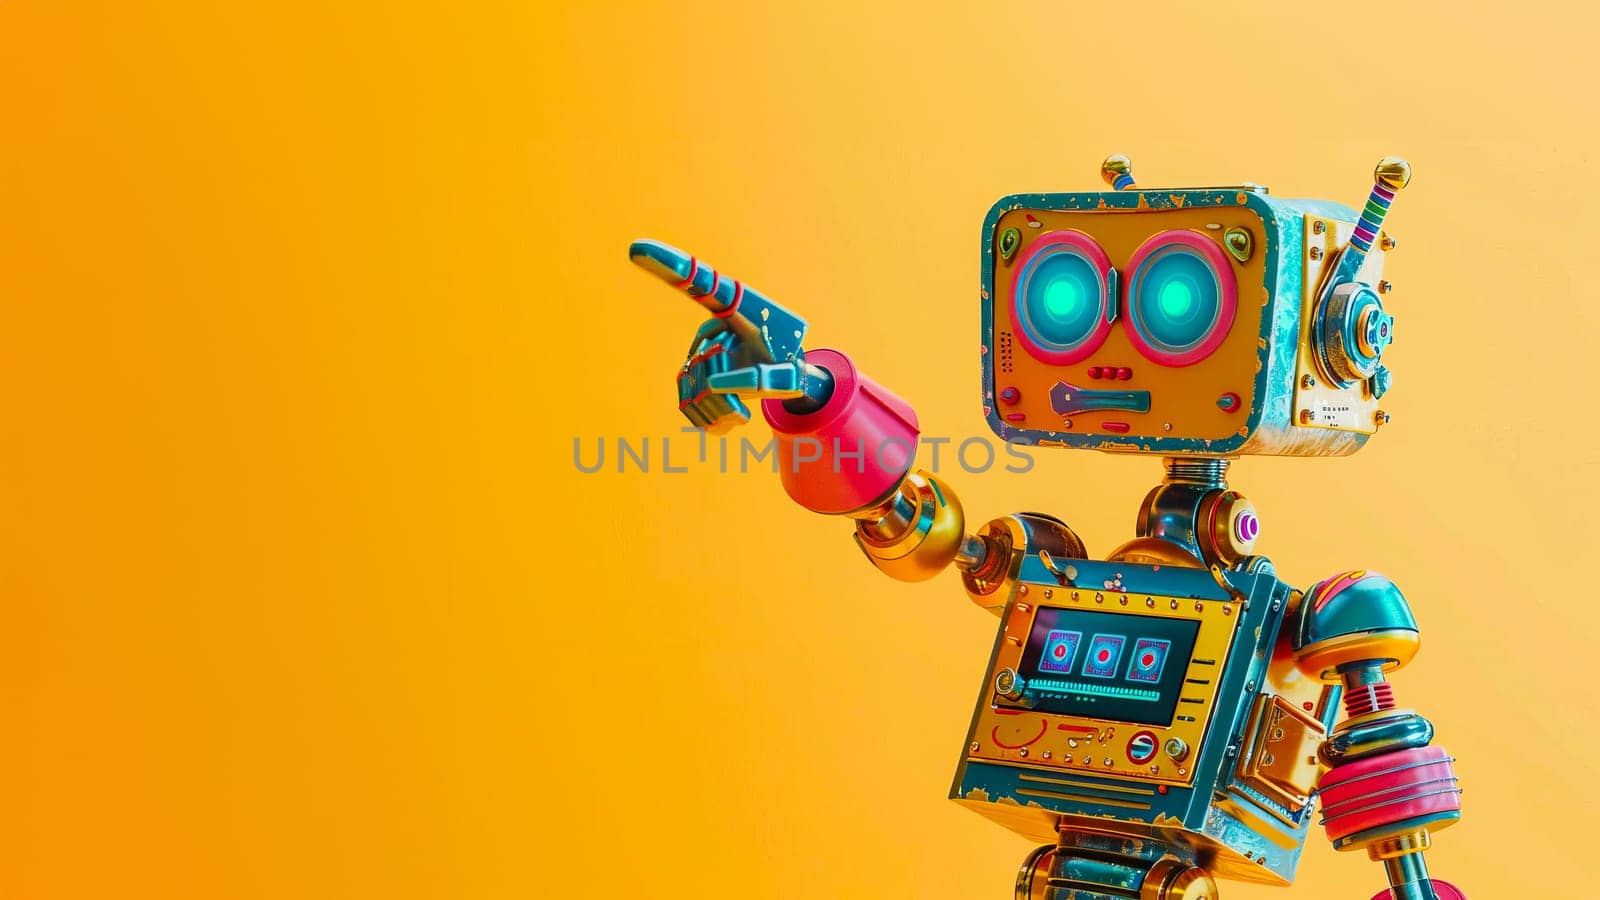 Colorful toy robot pointing at something on a vibrant yellow background. by vladimka